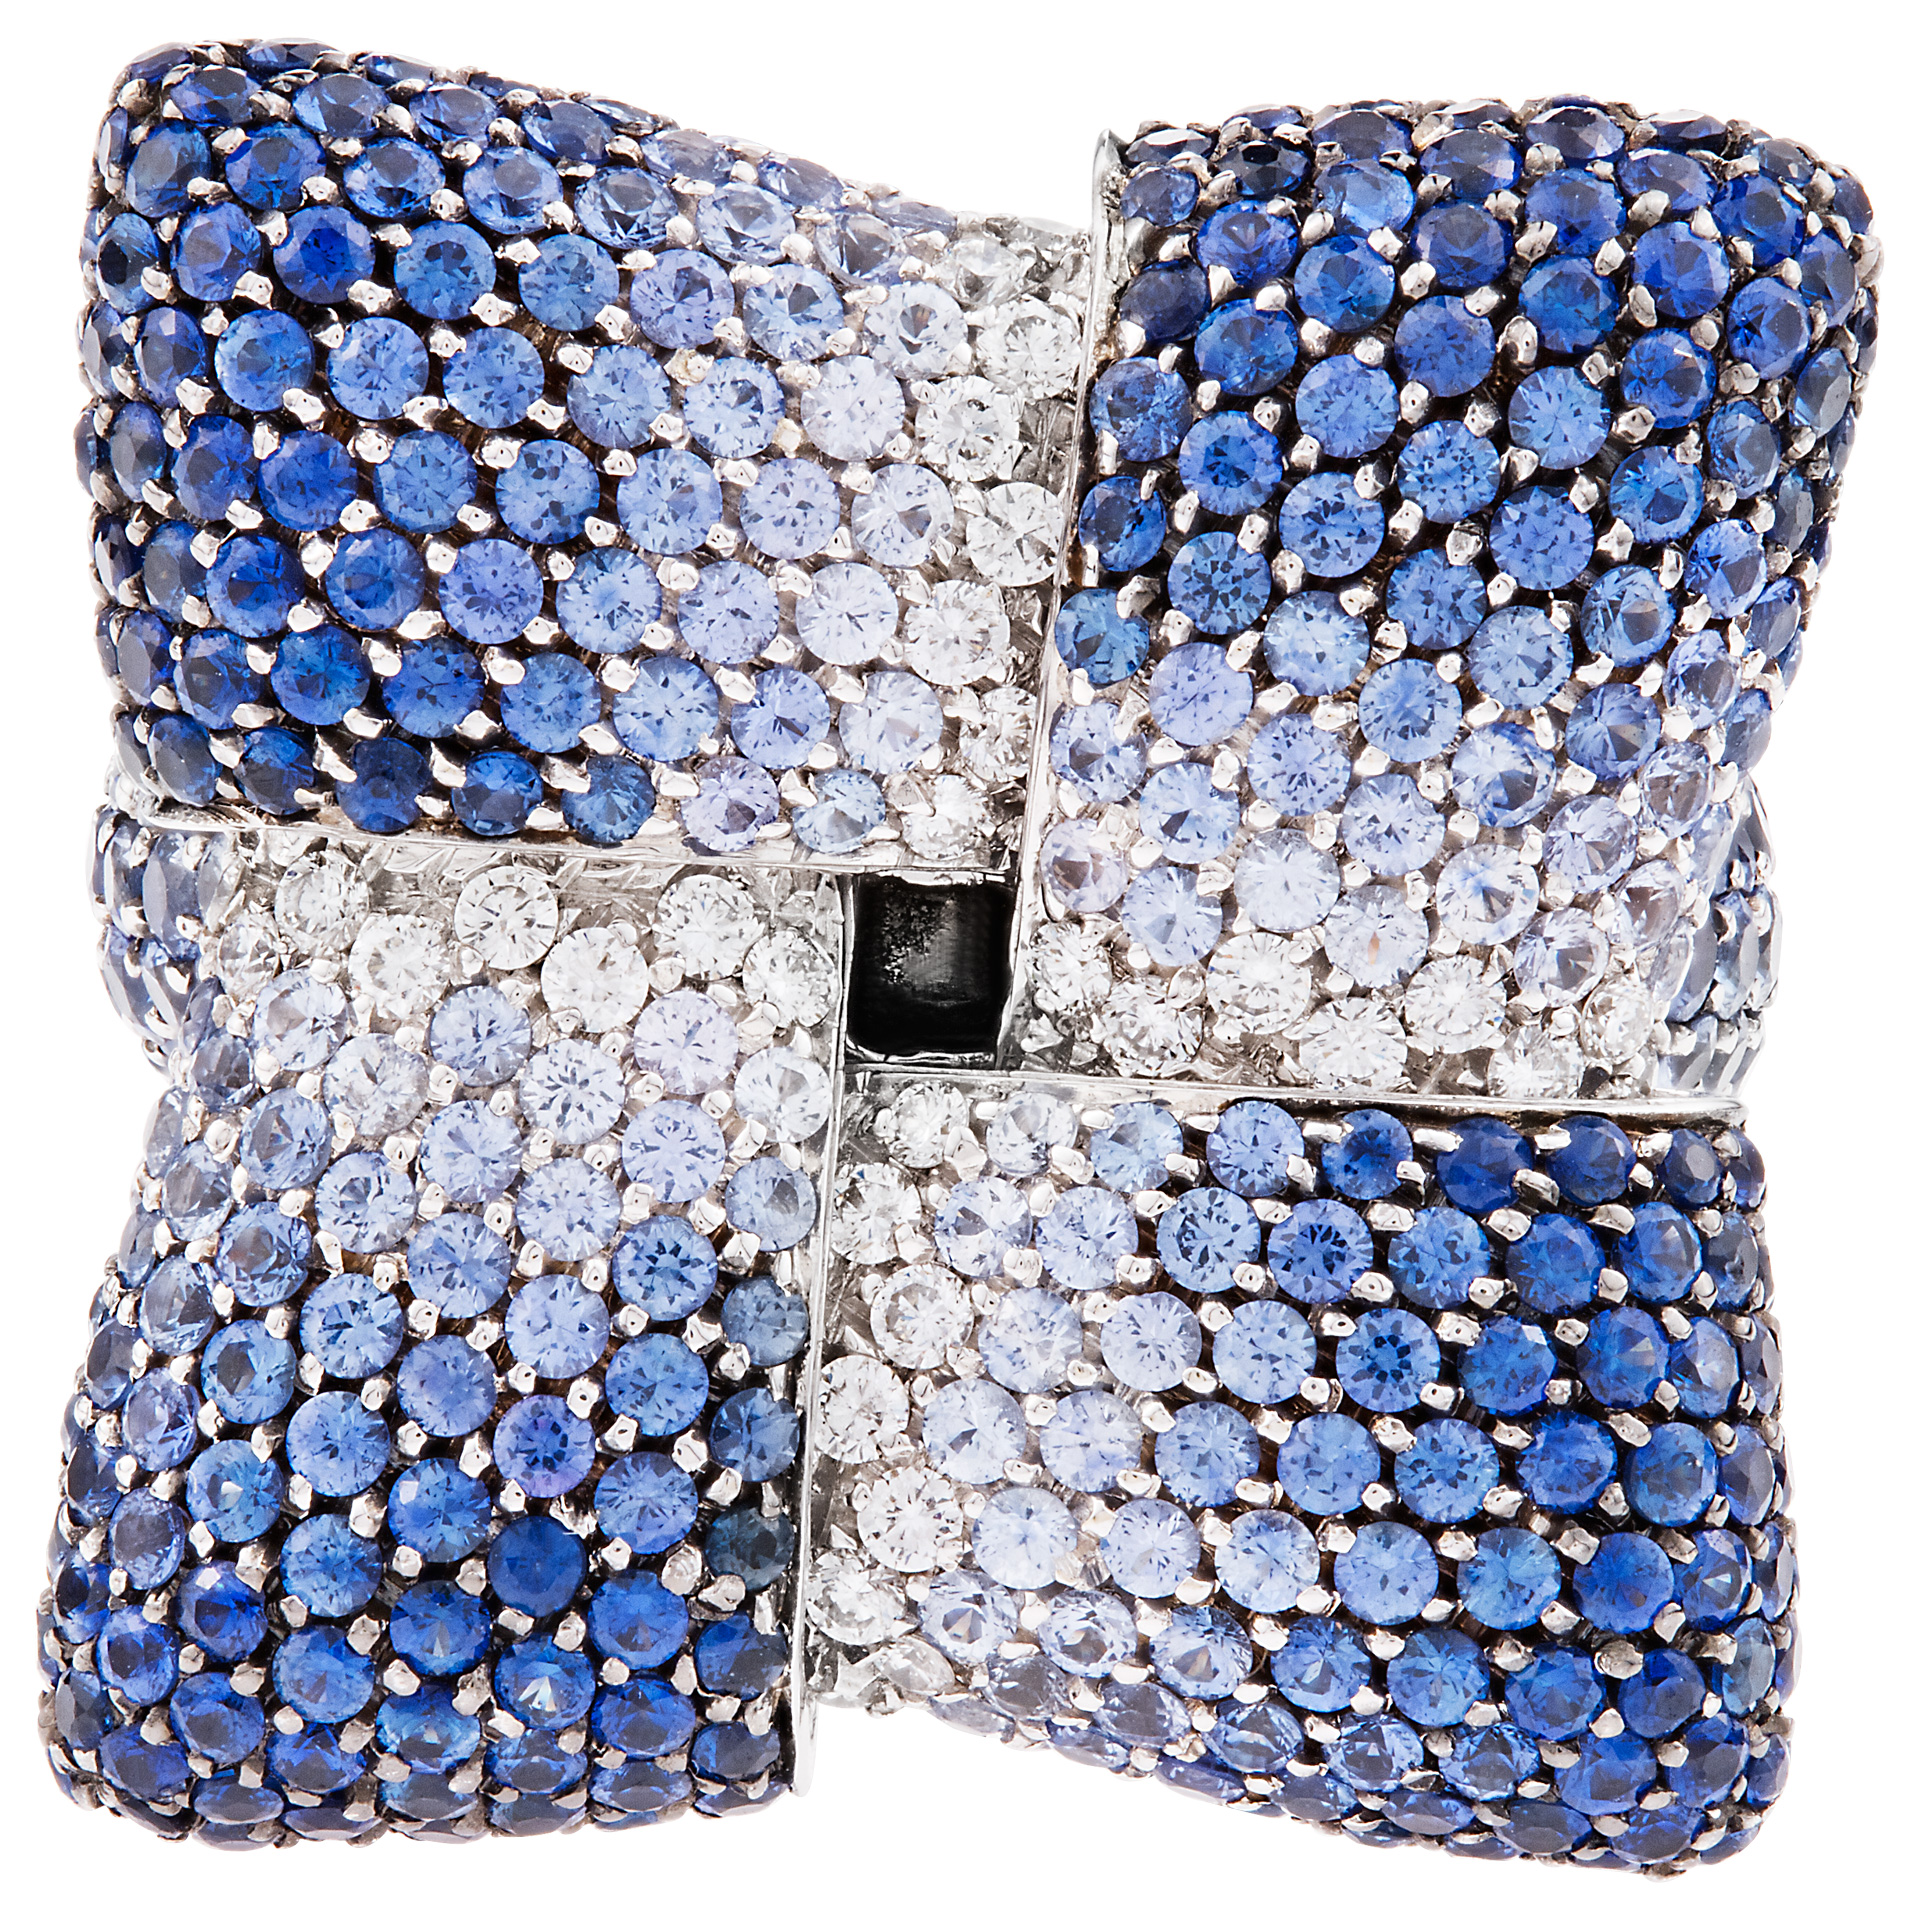 18k white gold pave diamond knot ring with sapphires running from deep blue to light blue.